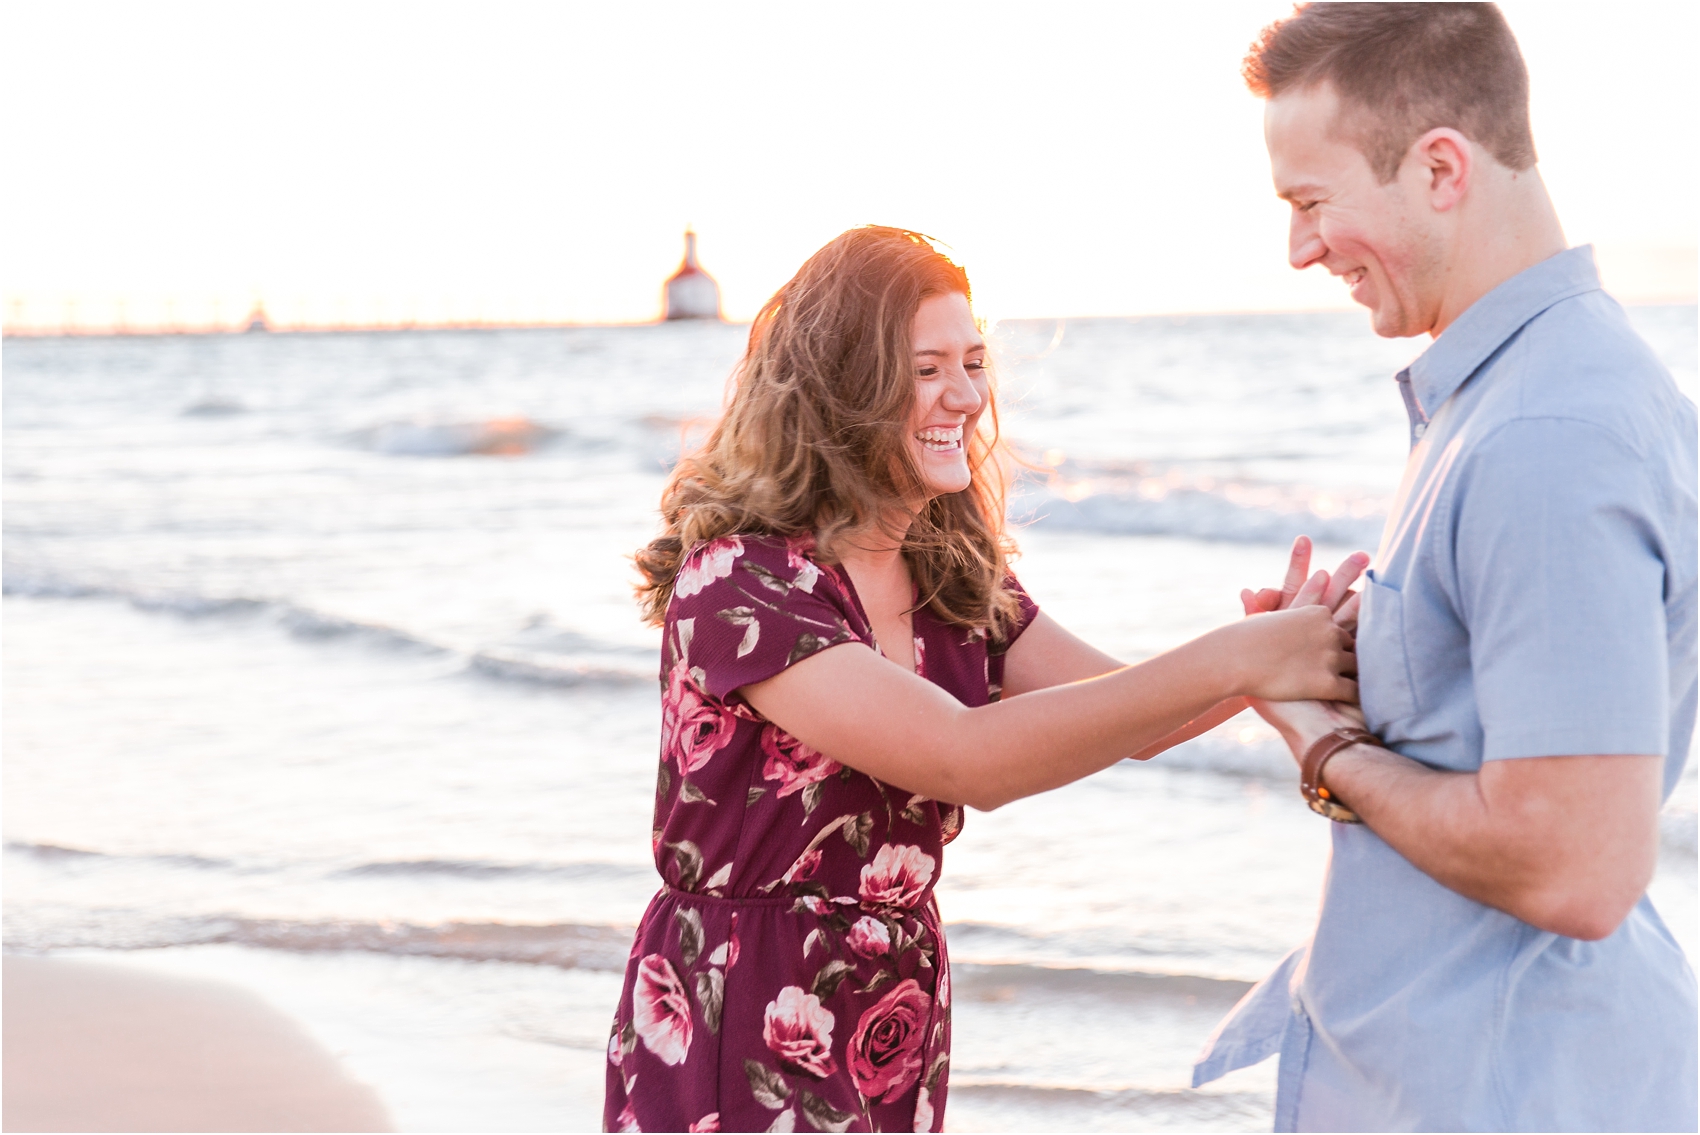 candid-end-of-summer-sunset-engagement-photos-at-silver-beach-in-st-joseph-mi-by-courtney-carolyn-photography_0037.jpg